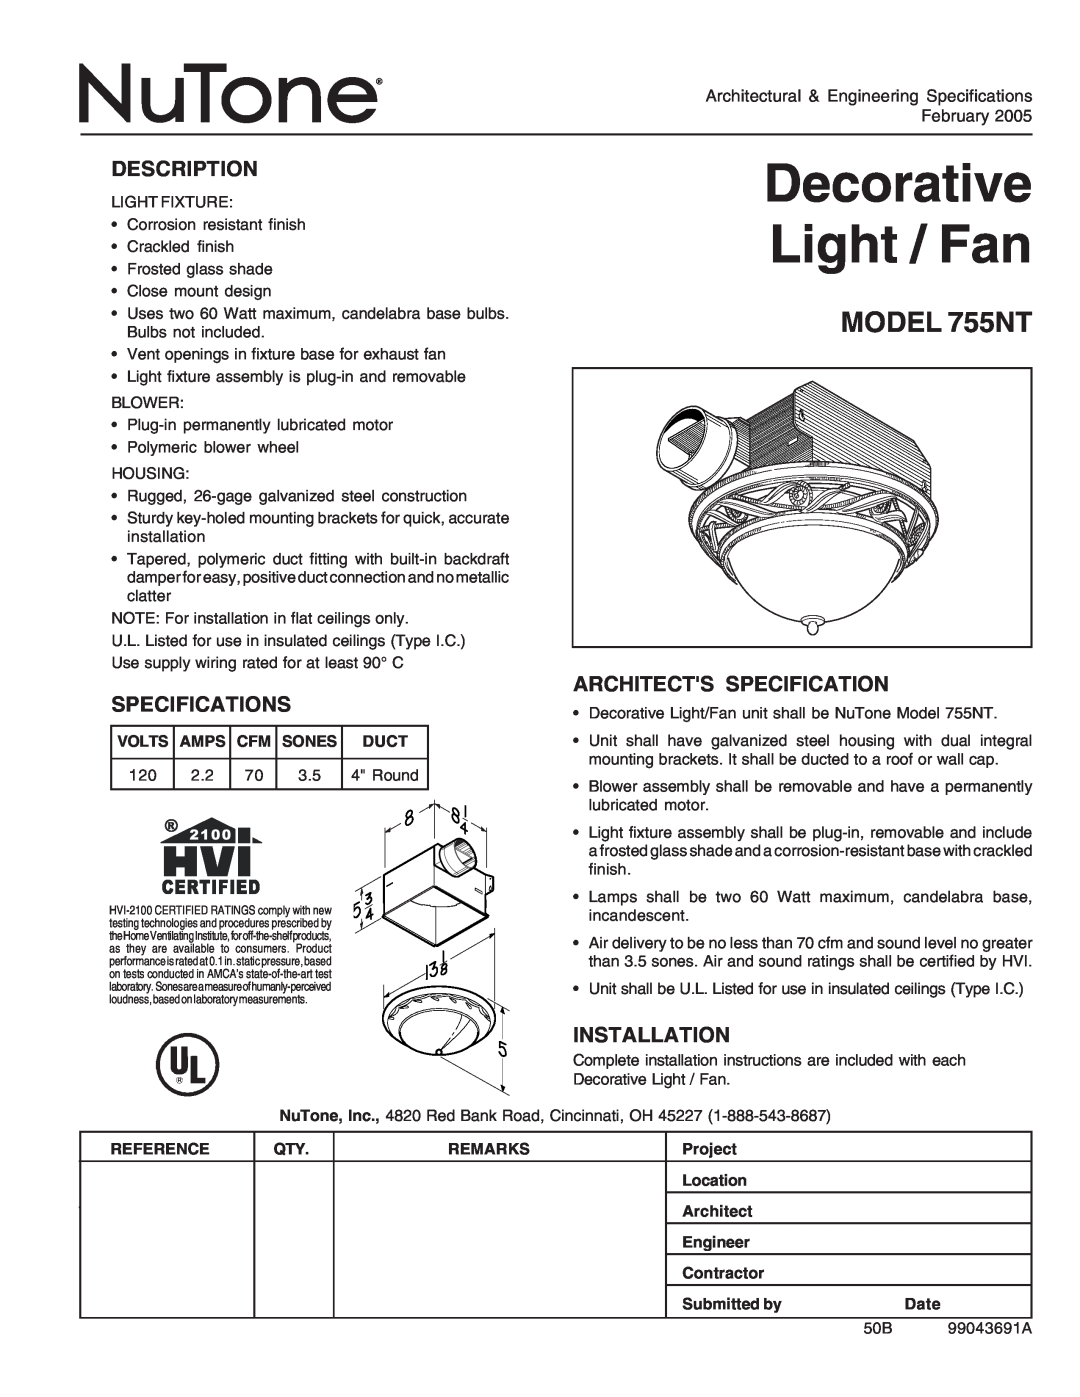 NuTone specifications Decorative Light / Fan, MODEL 755NT, Description, Specifications, Architects Specification 